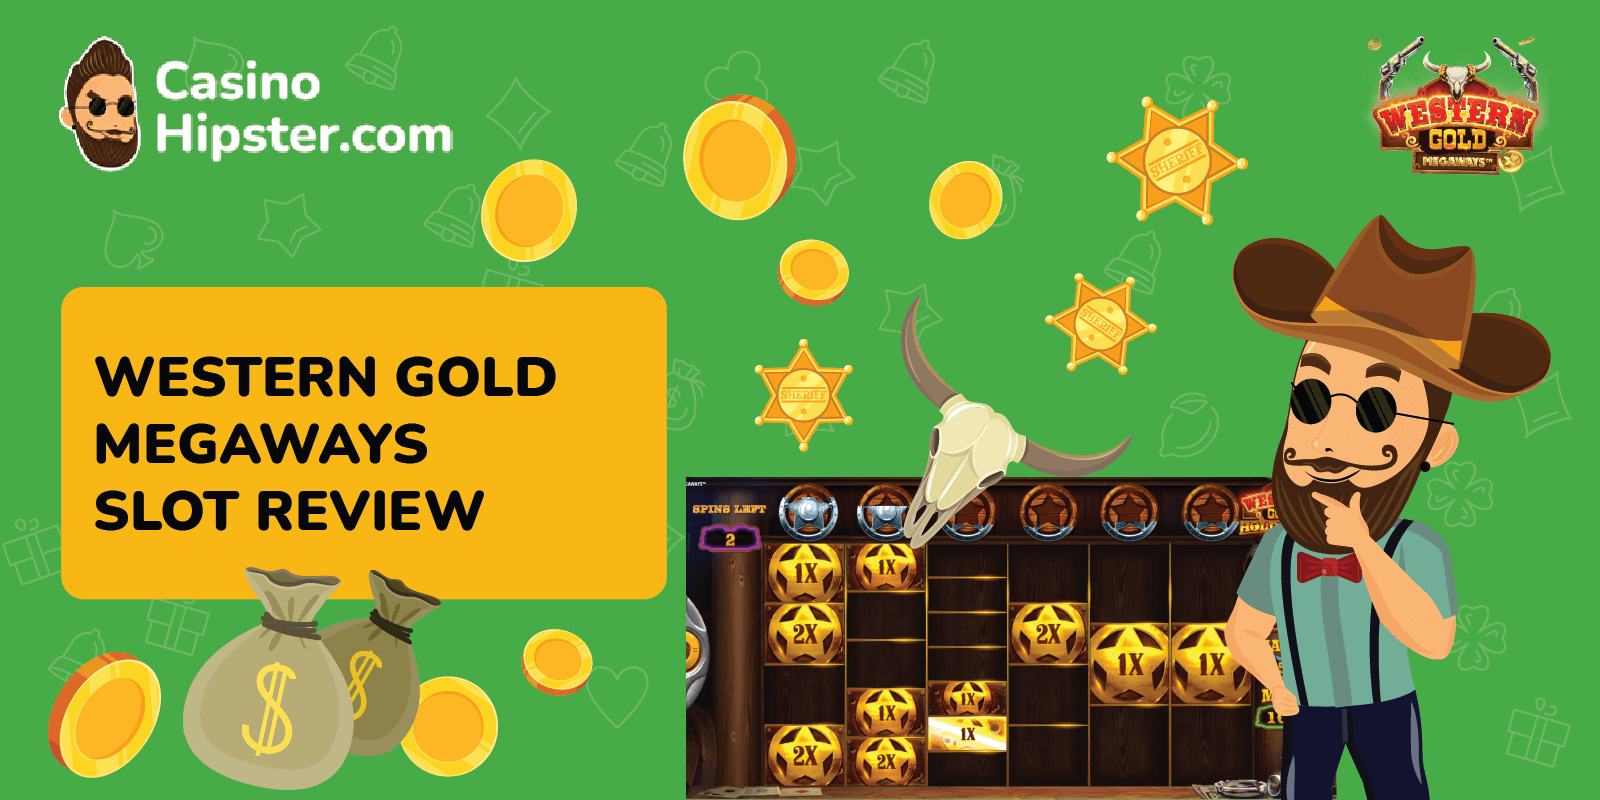 Western Gold Megaways Slot Review